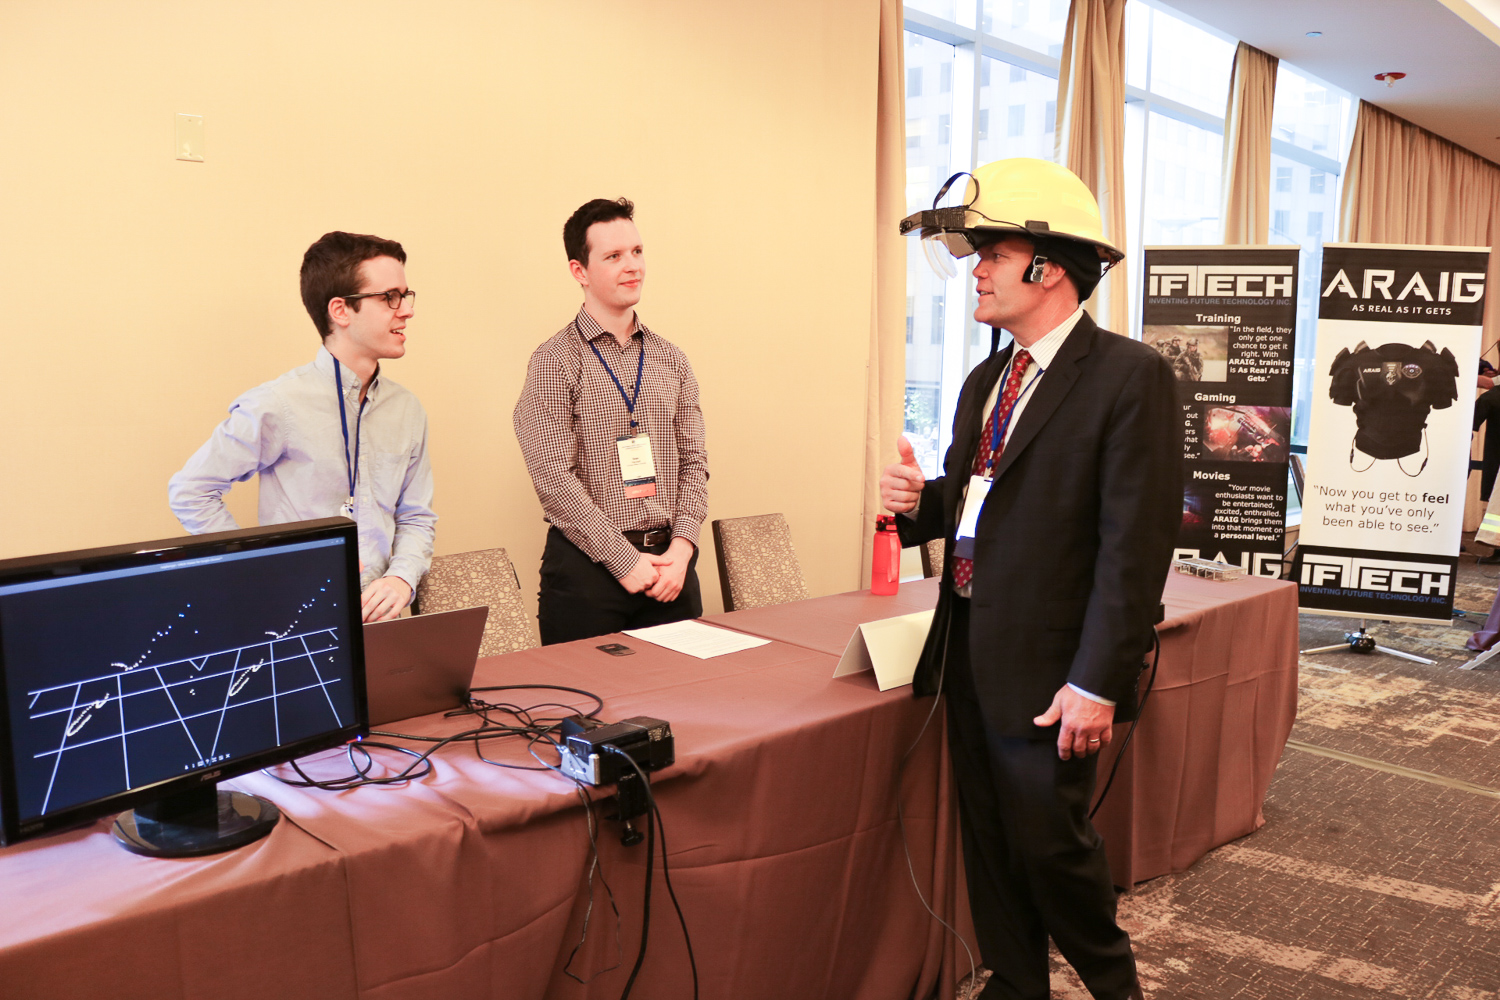 A man modeling a safety helmet talks with two others standing behind a table in a conference hotel.